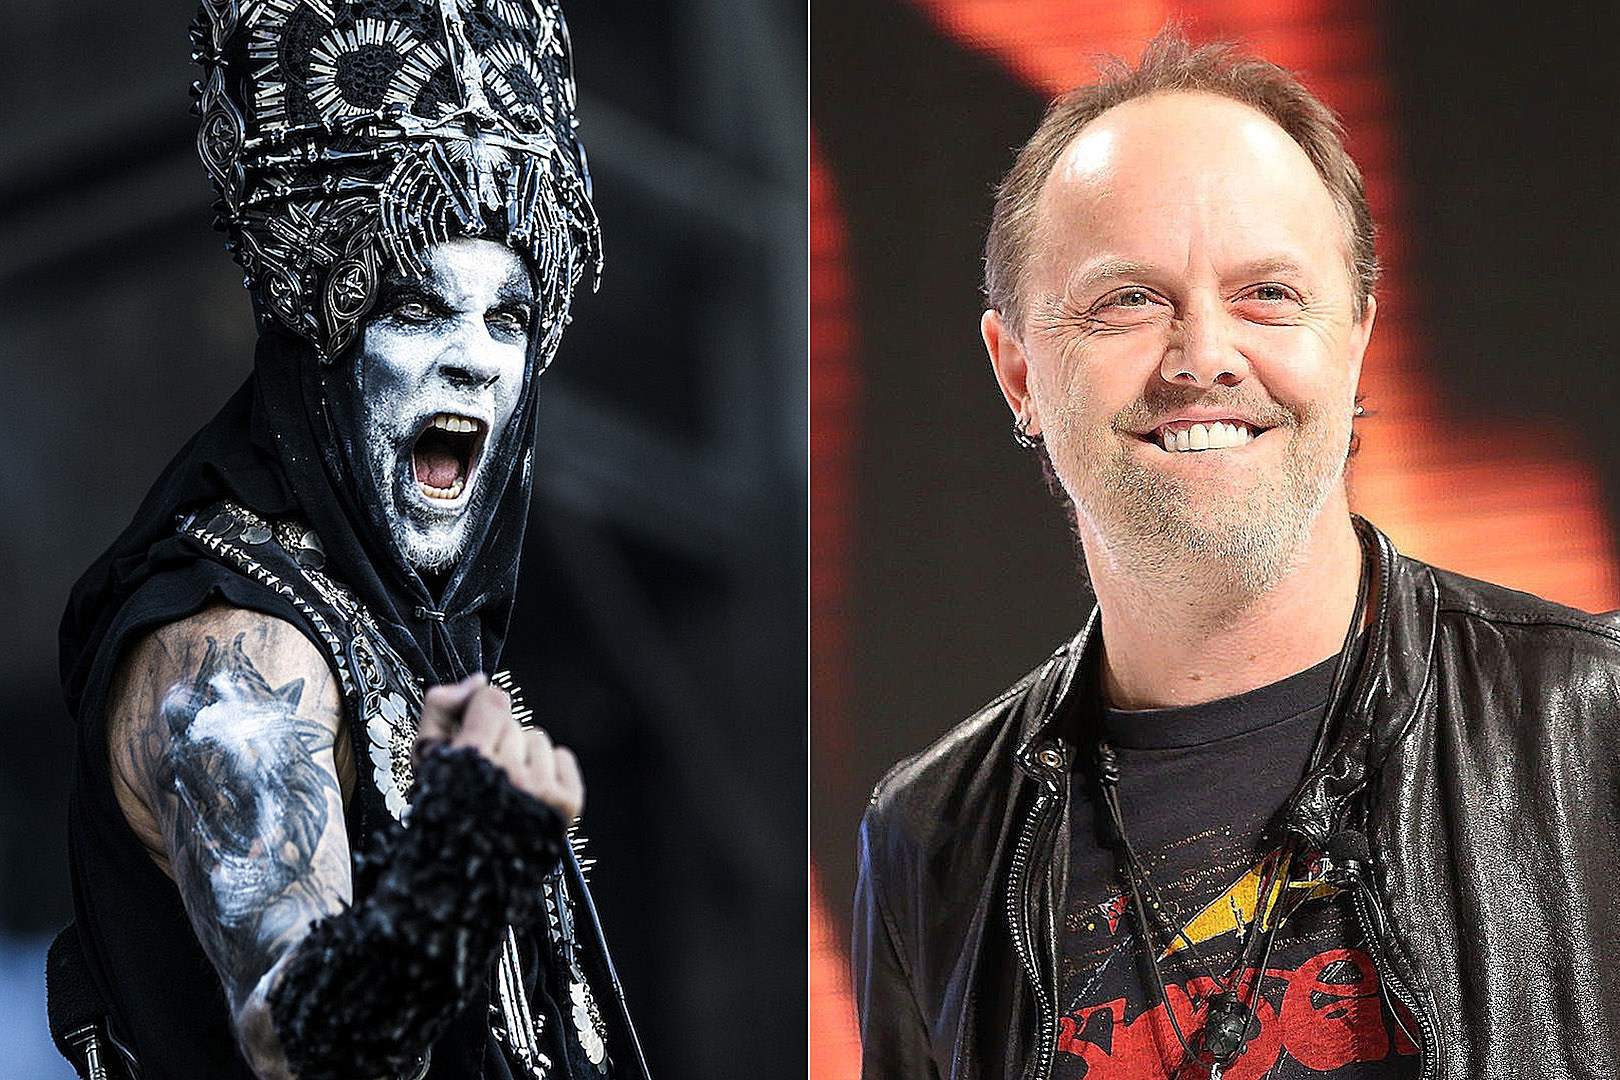 Nergal Names Metallica Song That’s ‘One of Their Best Ever’